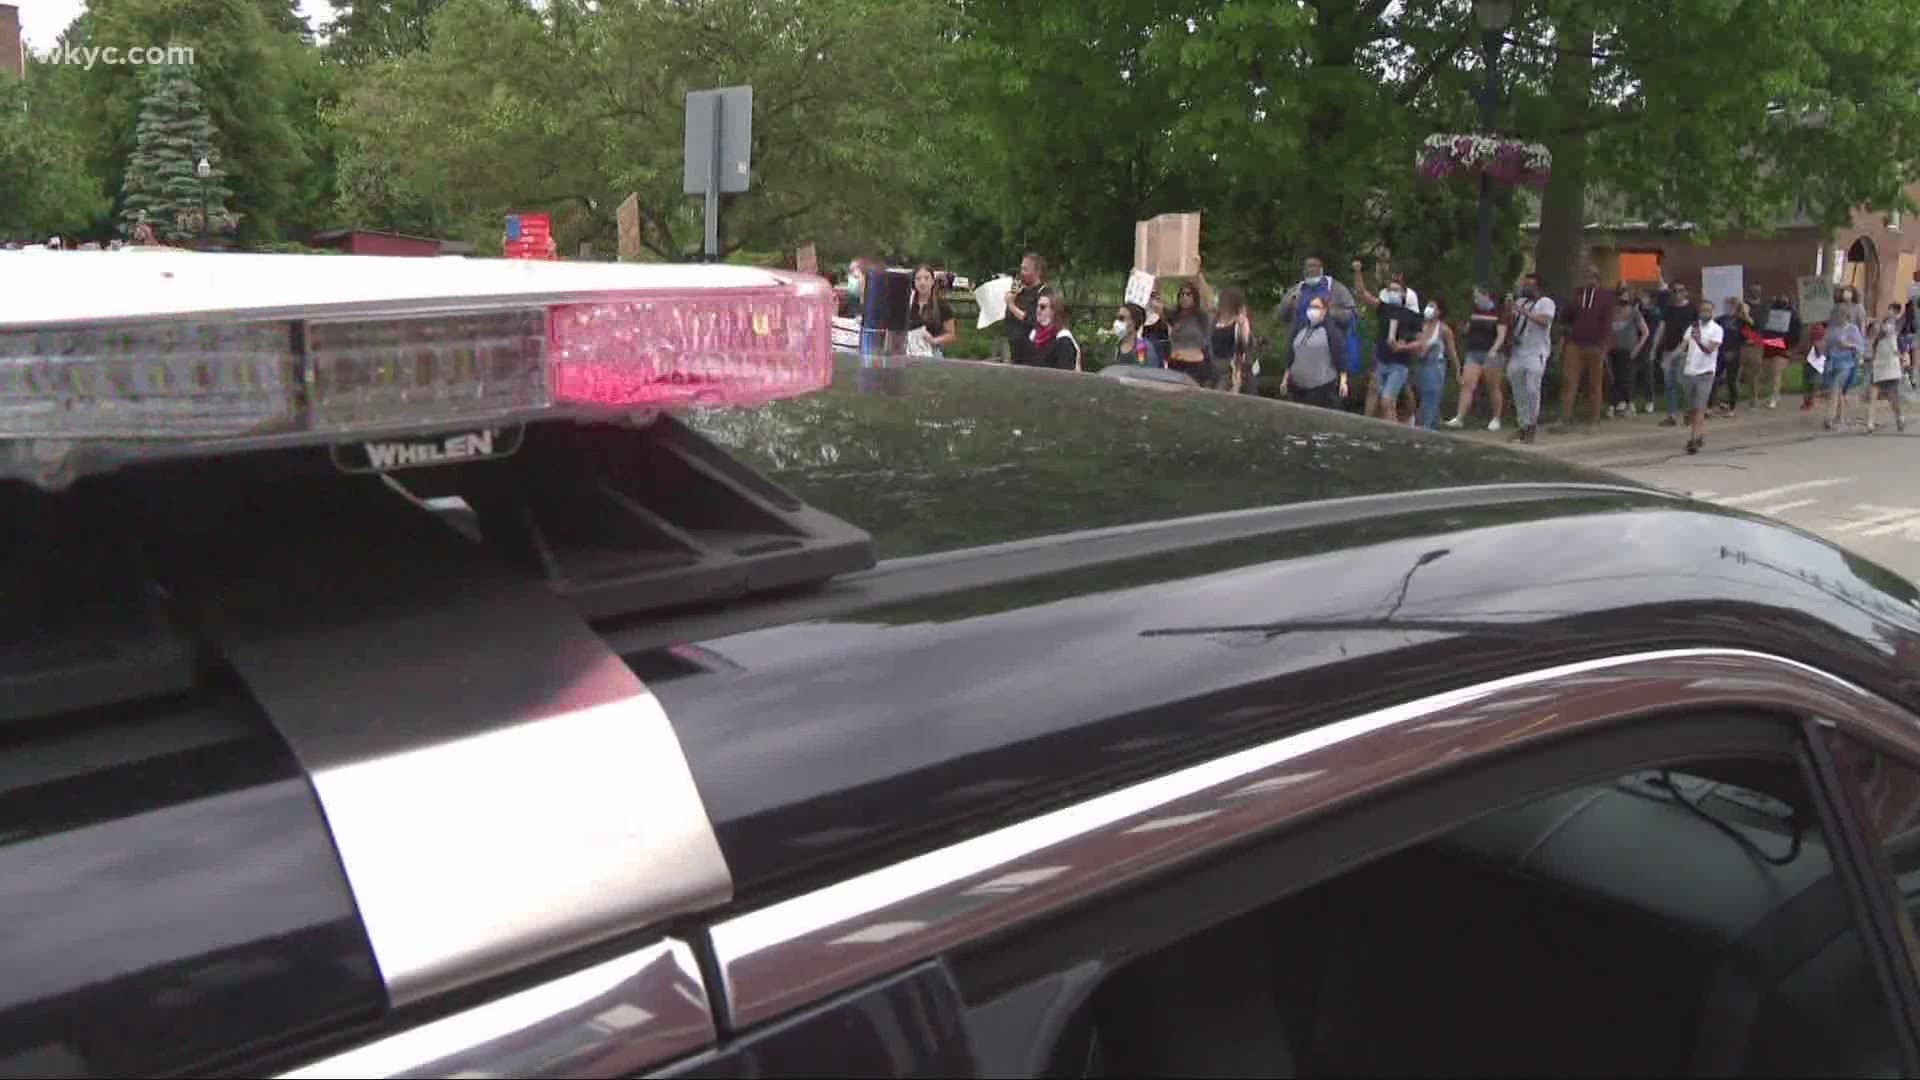 People from all walks of life joined forces in Chagrin Falls Thursday. Rachel Polanksy reports.